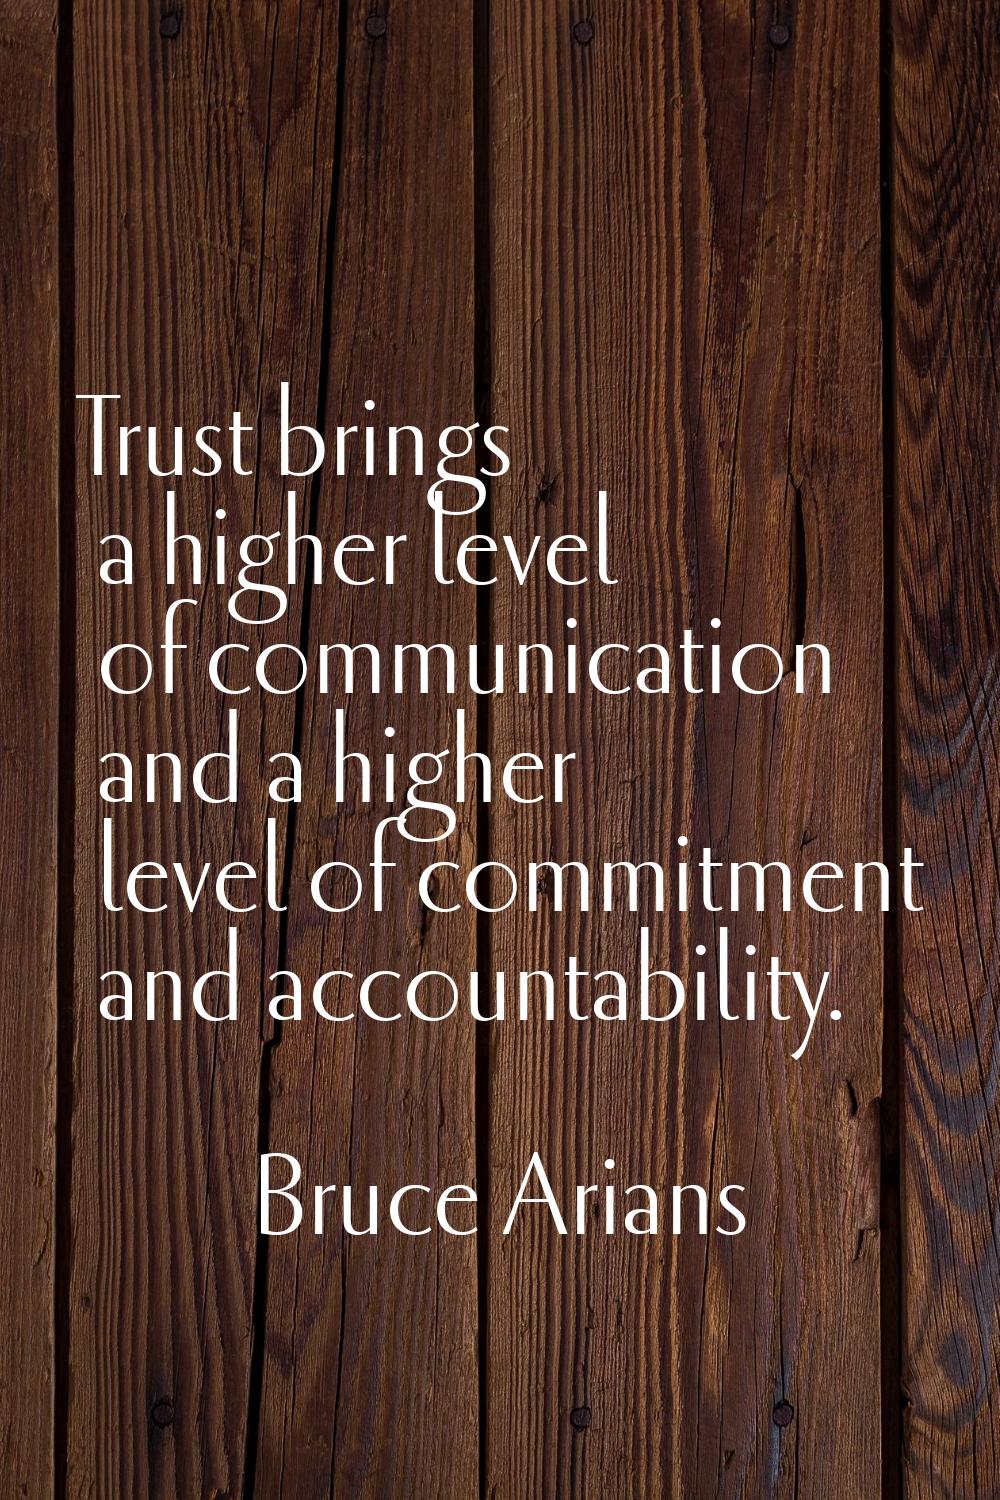 Trust brings a higher level of communication and a higher level of commitment and accountability.